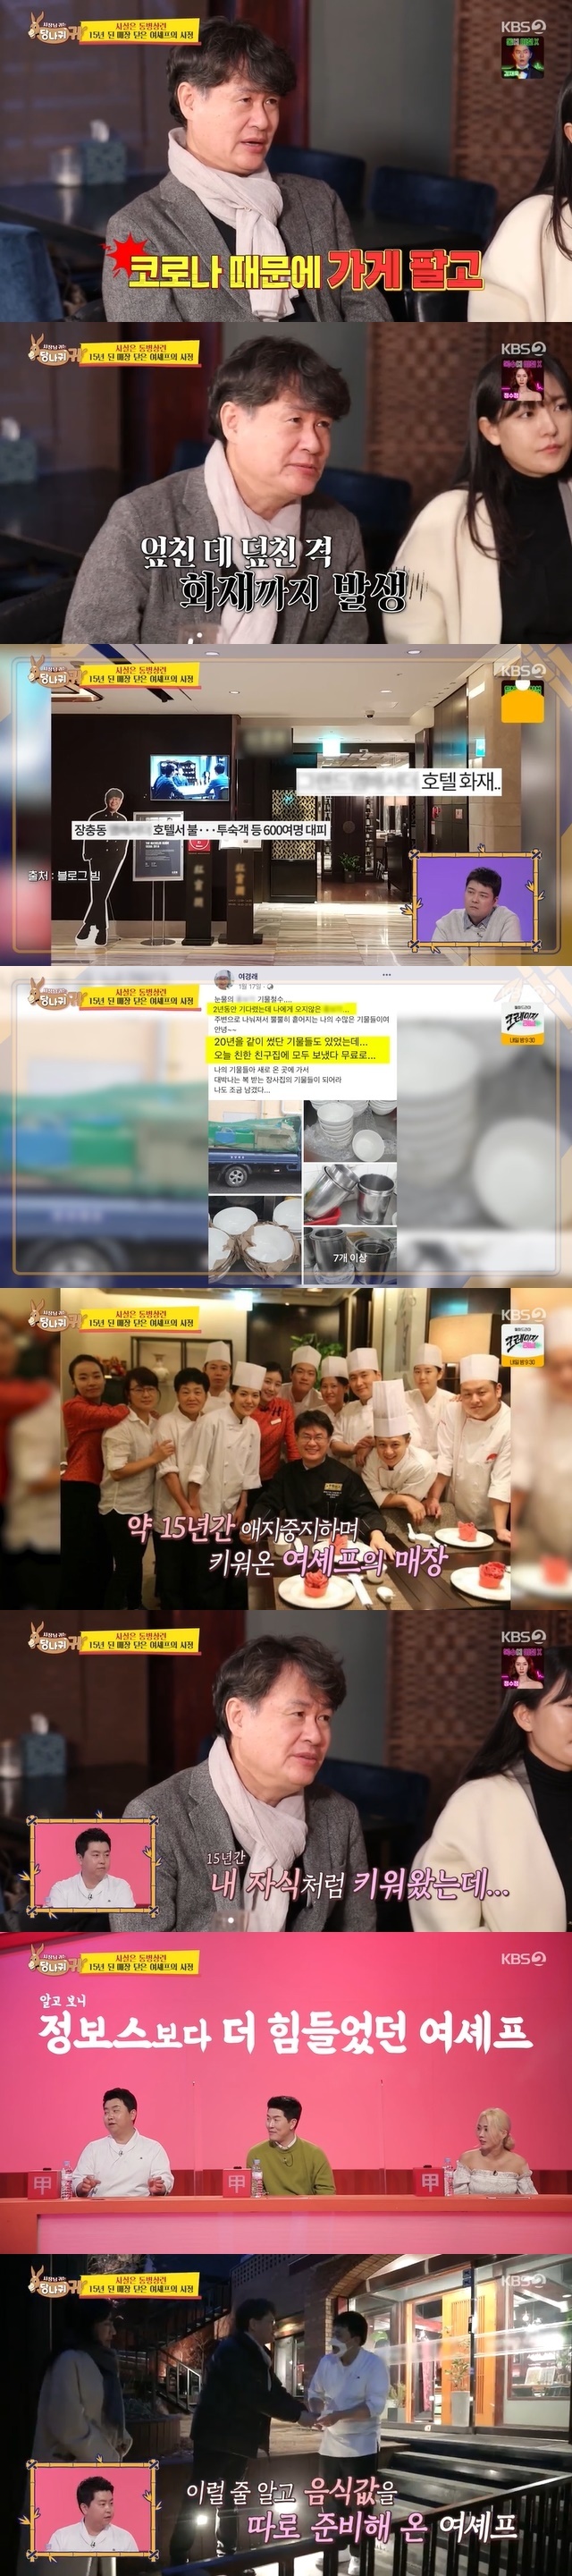 Yeo Kyung-rae Chef visits the shop of Jeong Ho-young and shares the pain of Dong-Byeong Sang-ryun and delivers the money to impress.In the 148th KBS 2TV entertainment Boss in the Mirror (hereinafter referred to as The Ass ear) broadcast on March 20, it conveyed the difficulties of the store operated by Jeong Ho-young.On this day, Jeong Ho-young confessed that the store operating in Seodaemun-gu, Seoul, was taking 0One sales.Jeong Ho-young said, The average of 1.5 teams of Haru visits and worries about closing down due to the accumulation of deficits. I have been to eat on the day of the previous 0 team, but I do not have time these days.I am ashamed to be a 0 team, so I gave my money and I ate it, but there is a limit. Jeong Ho-young gathered his own ones and directly conveyed the current situation: When it opened and went well, it sold up to 50 million One in sales.(But now) its a complete deficit - rent, material and labor costs are serious.I can not help but organize the store after losing money, but then I have to organize one. In fact, it was also the latest worry of Jeong Ho-young. As the deficit is old, should we organize it or change it to another industry?I sometimes can not sleep because I am worried. Jeong Ho-young was seen relying on feng shui and saju to overcome the crisis of the store; inviting Feng shui and Ming ri experts directly to the store for advice.The expert consulted Jeong Ho-young to provide shop interior consultation and also to have Hwangryong as a lucky symbol.Jeong Ho-young was a bit better with the expert saying that he was lucky.After that, Yeo Kyung-rae Chef and Park Eun-young Chef came to see the SNS post of Jeong Ho-young that the store is difficult to do.Jeong Ho-young welcomed the two, and they showed a lot of expensive food and said that the food was delicious. I do not know why there are no guests.Then, Yeo Kyung-rae said, We had several shops, but last year we sold the store altogether because of Corona 19, and there was a store fire.In fact, Yeo Kyung-rae Chef closed the store, which had been operating for 15 years in the aftermath of the 2020 fire that hit Corona 19.I was sick and I am thinking about going over the hump now, and I do not think I need to have a negative factor for a long time, said Yeo Kyung-rae.